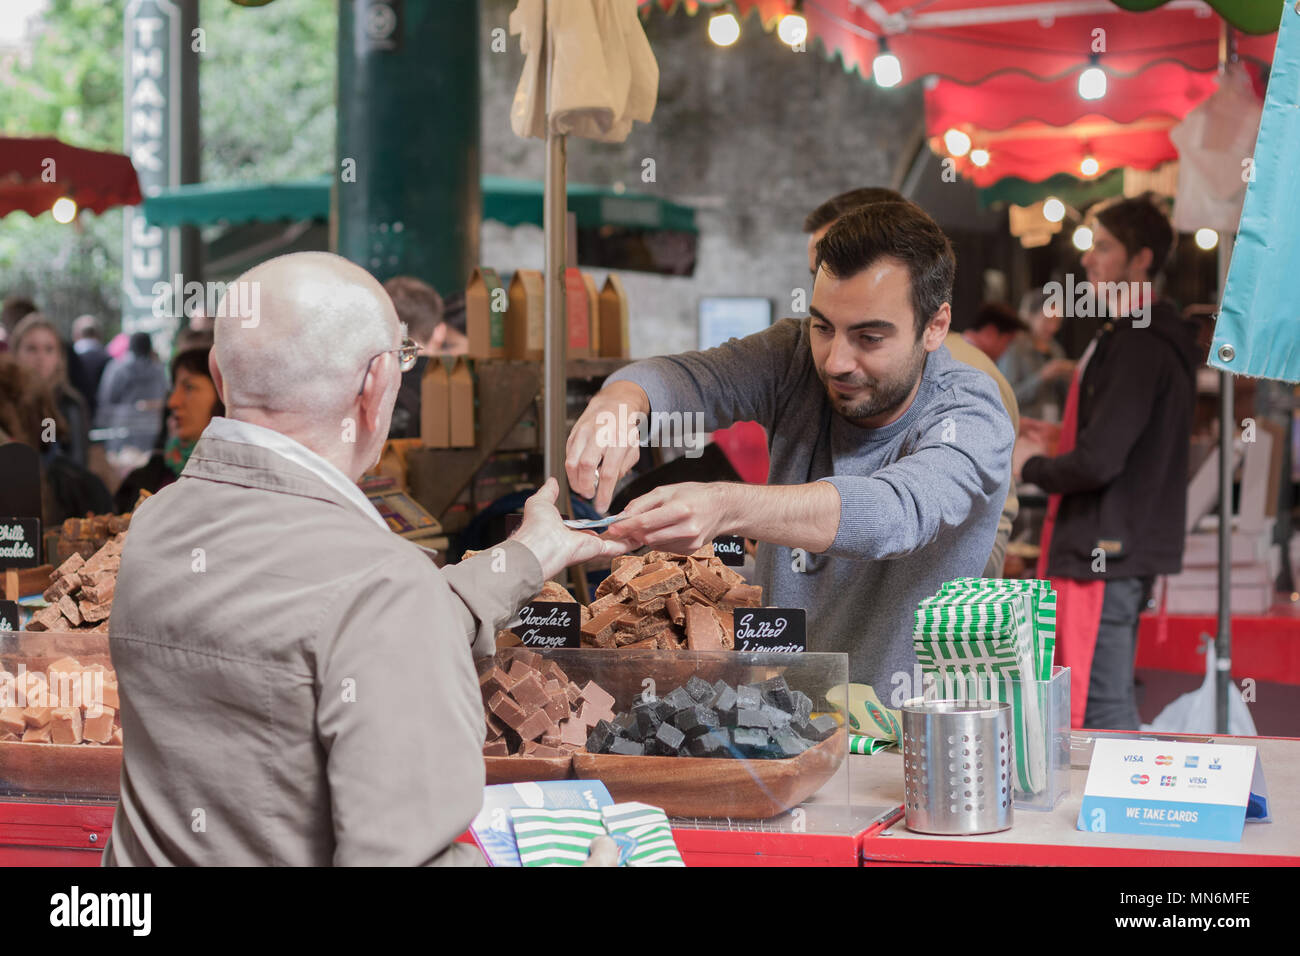 SOUTHWARK, LONDON-SEPTEMBER 7,2017: Man is selling chocolate pieces in stall at Borough Market on September 7, 2017 in London. Borough Market Stock Photo